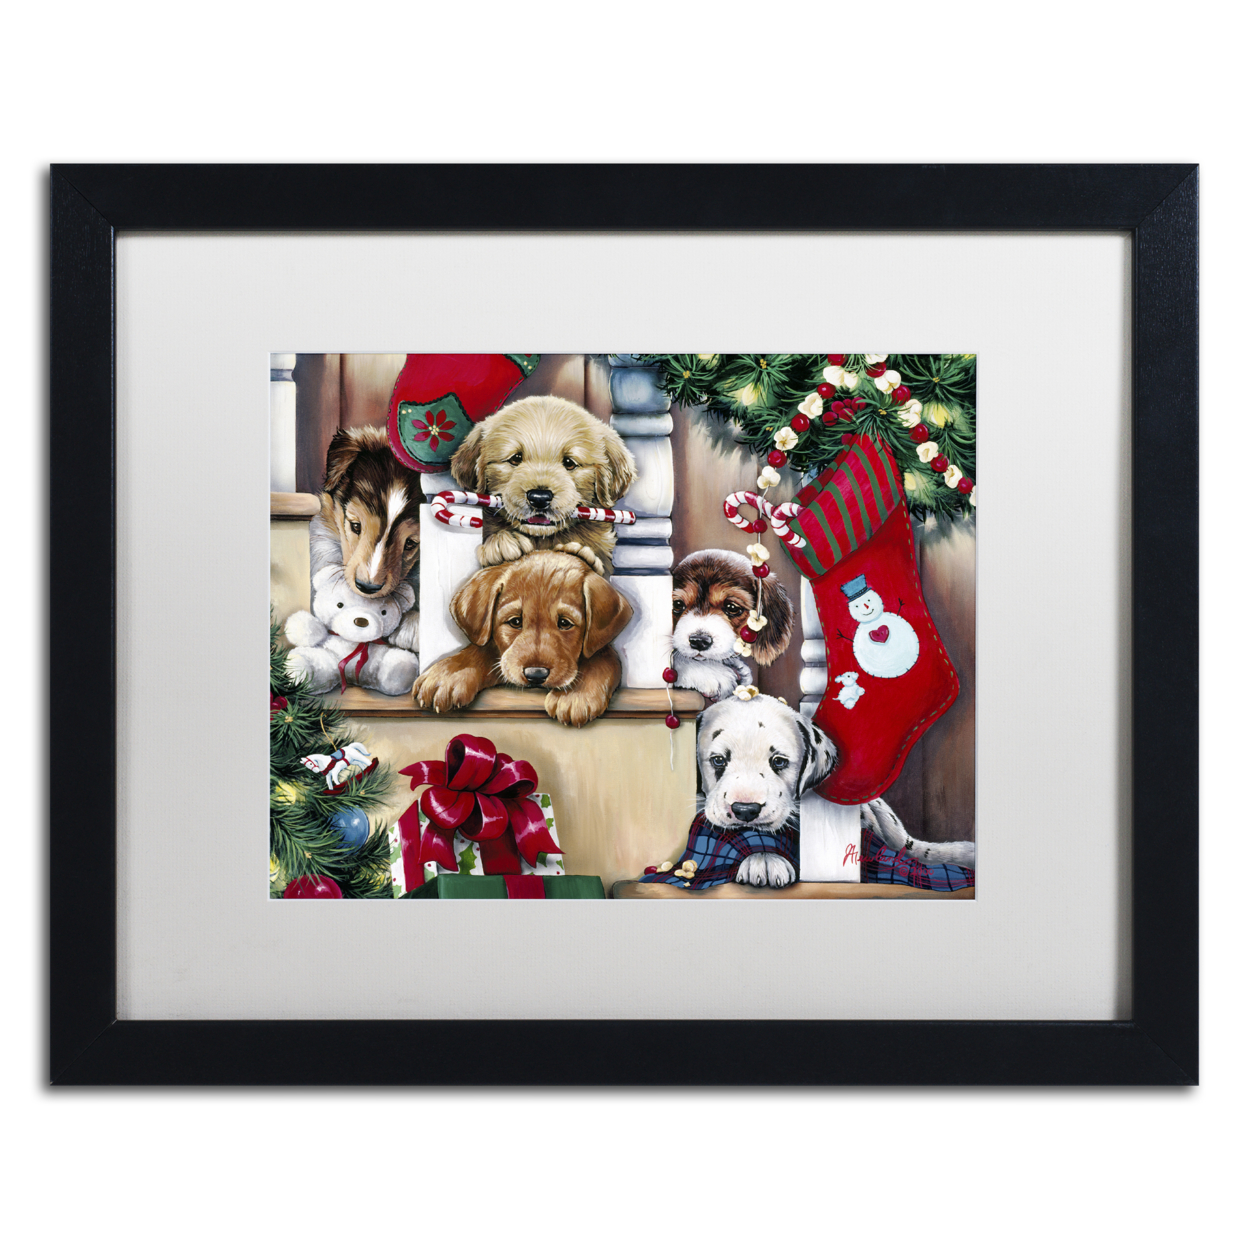 Jenny Newland 'Christmas Puppies On The Loose' Black Wooden Framed Art 18 X 22 Inches